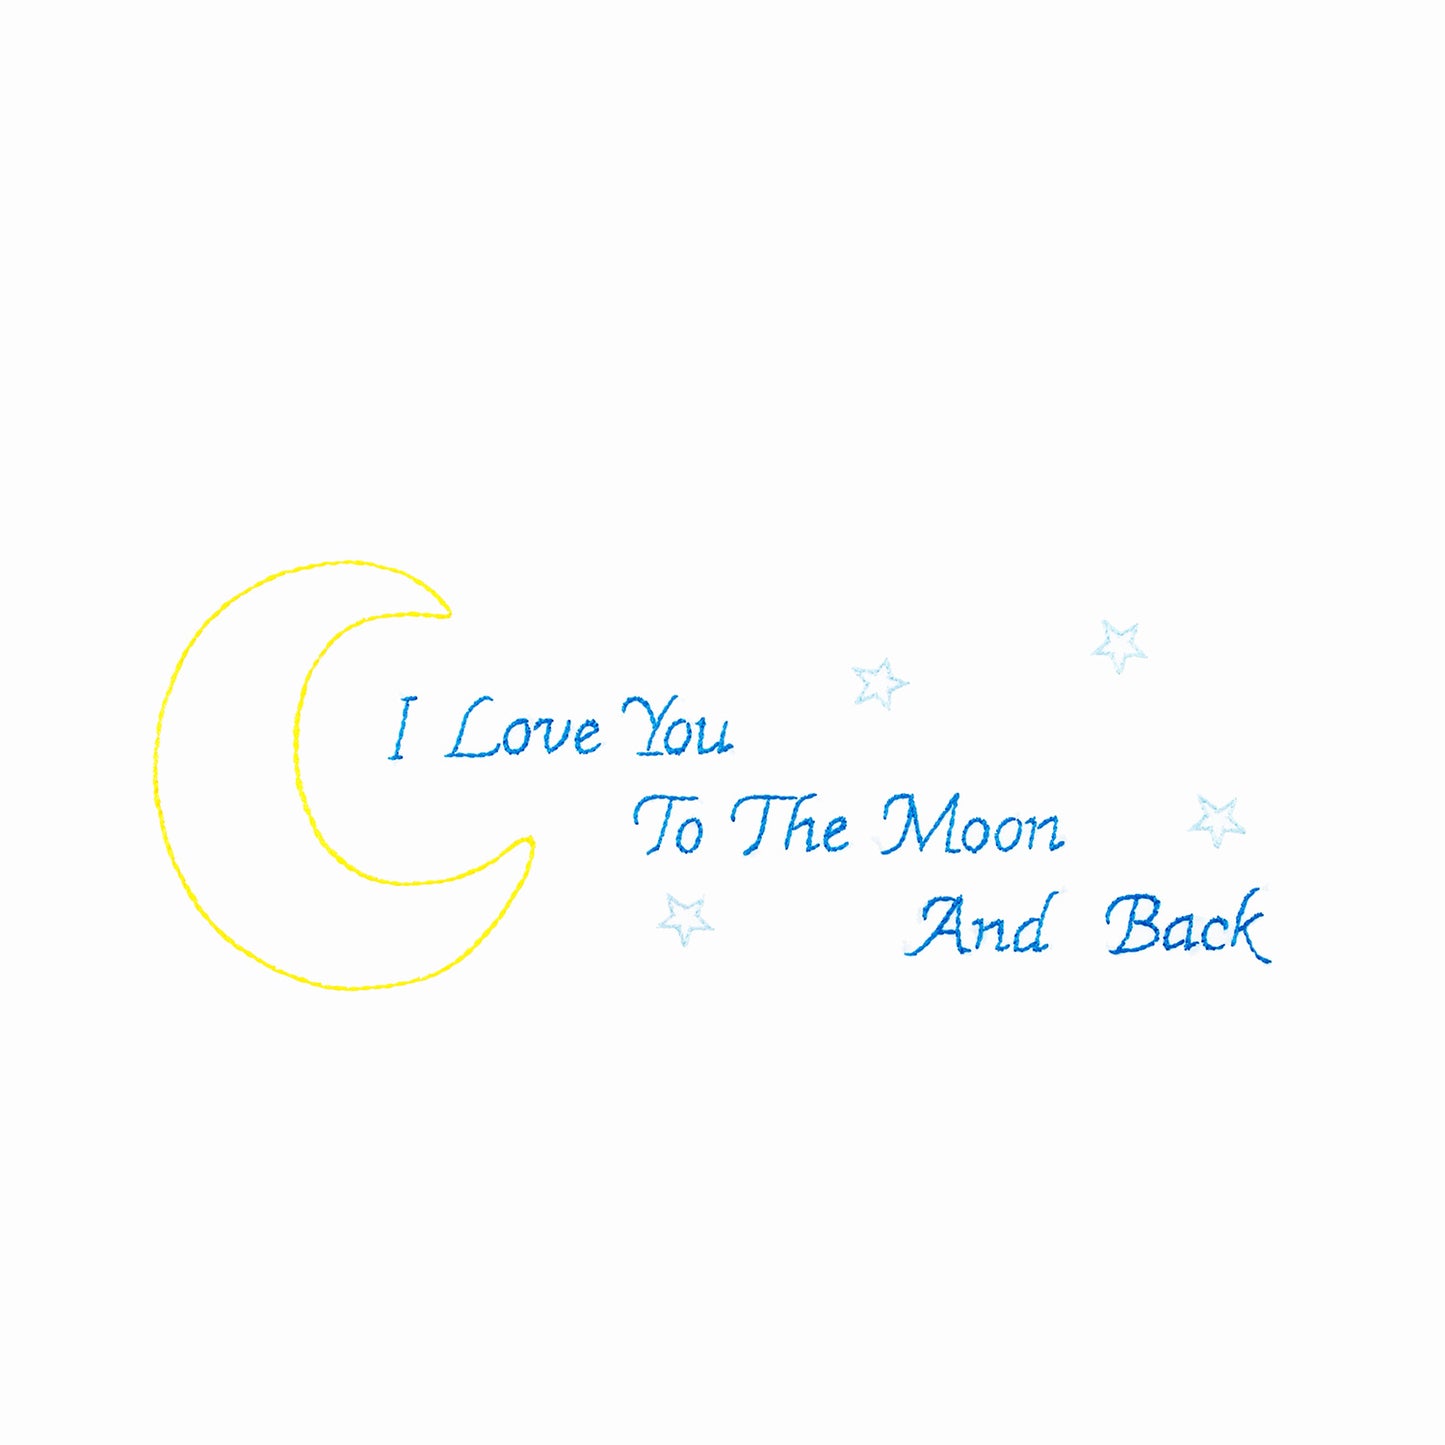 Love You to The Moon Embroidery Pillowcase Set Alternative View #1